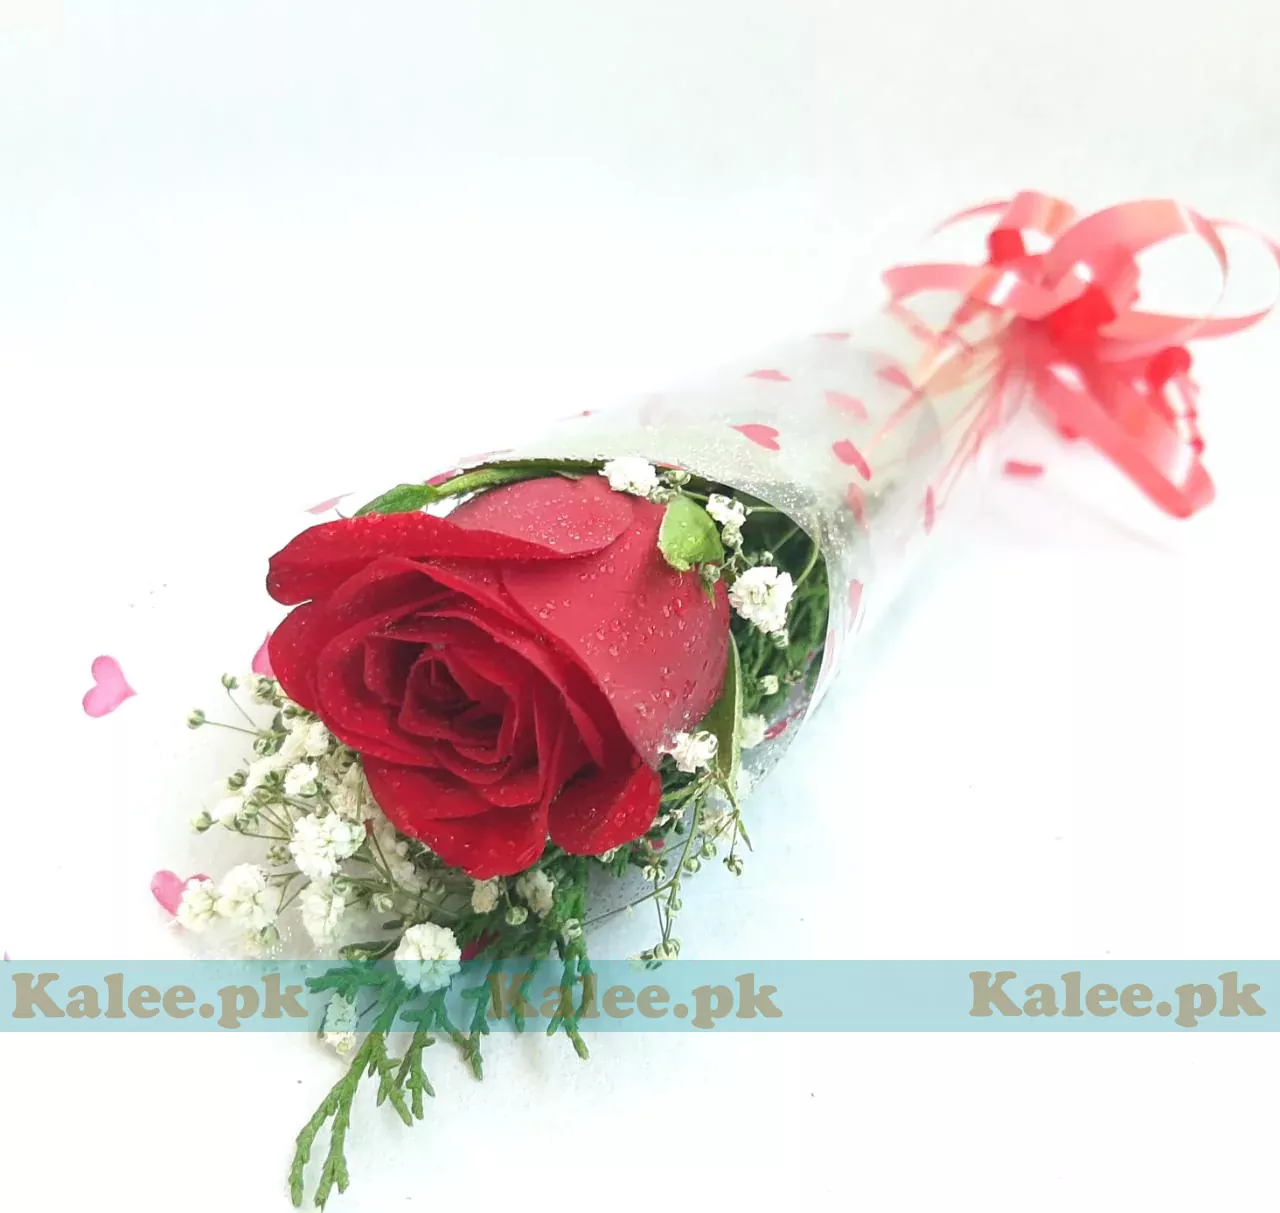 A single red rose adorned with baby's breath and wrapped in clear plastic.